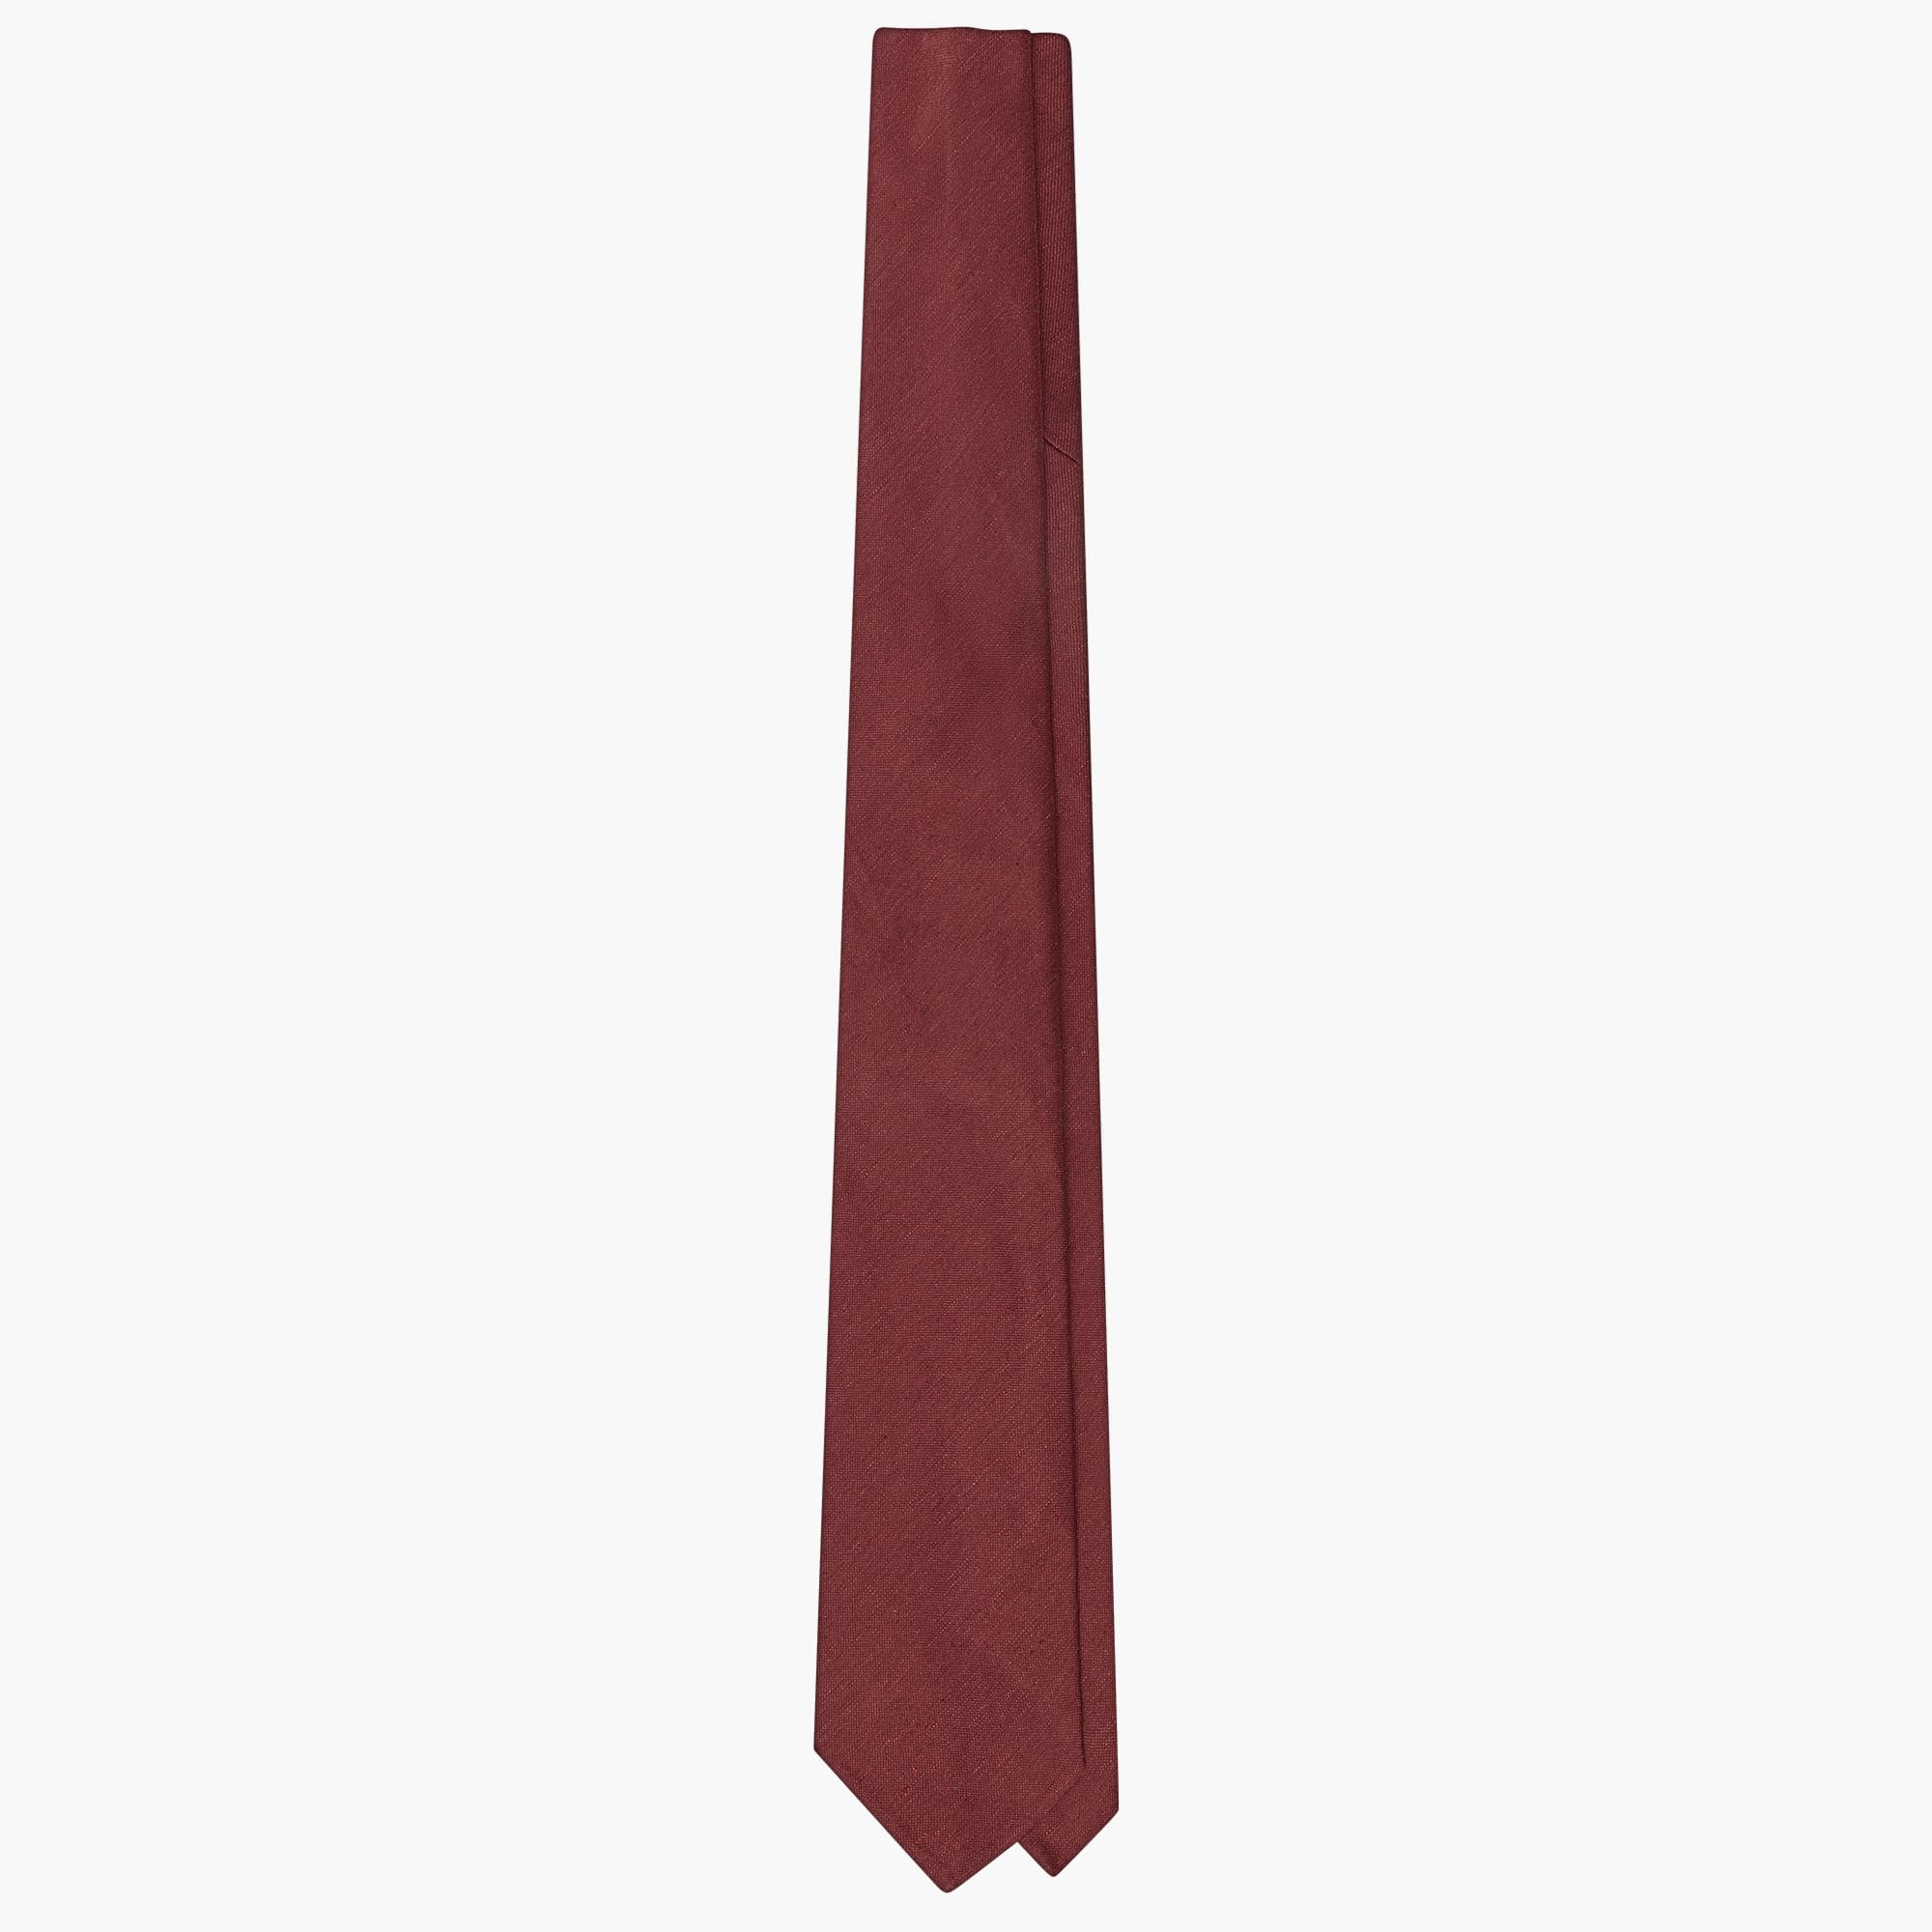 3-Fold Solid Silk And Linen Tie - Burgundy